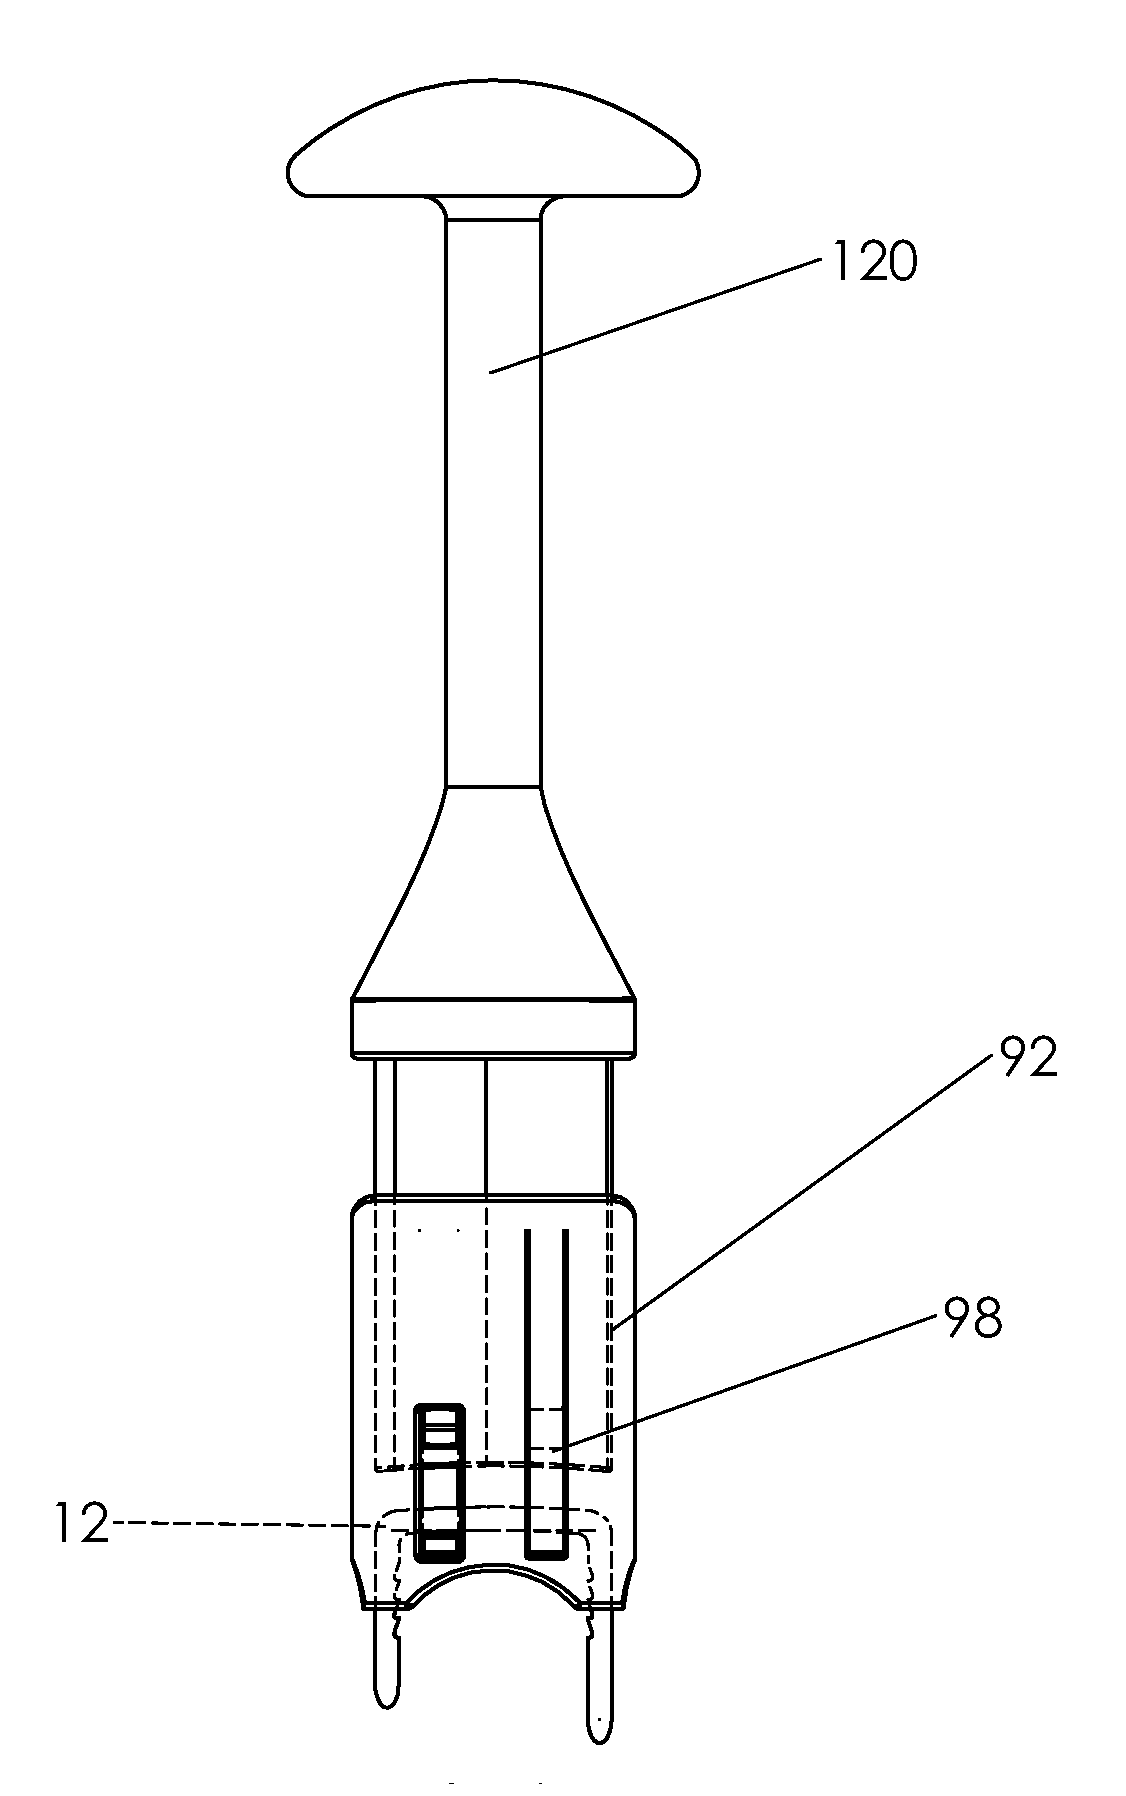 Bone staple, instrument and method of use and manufacturing